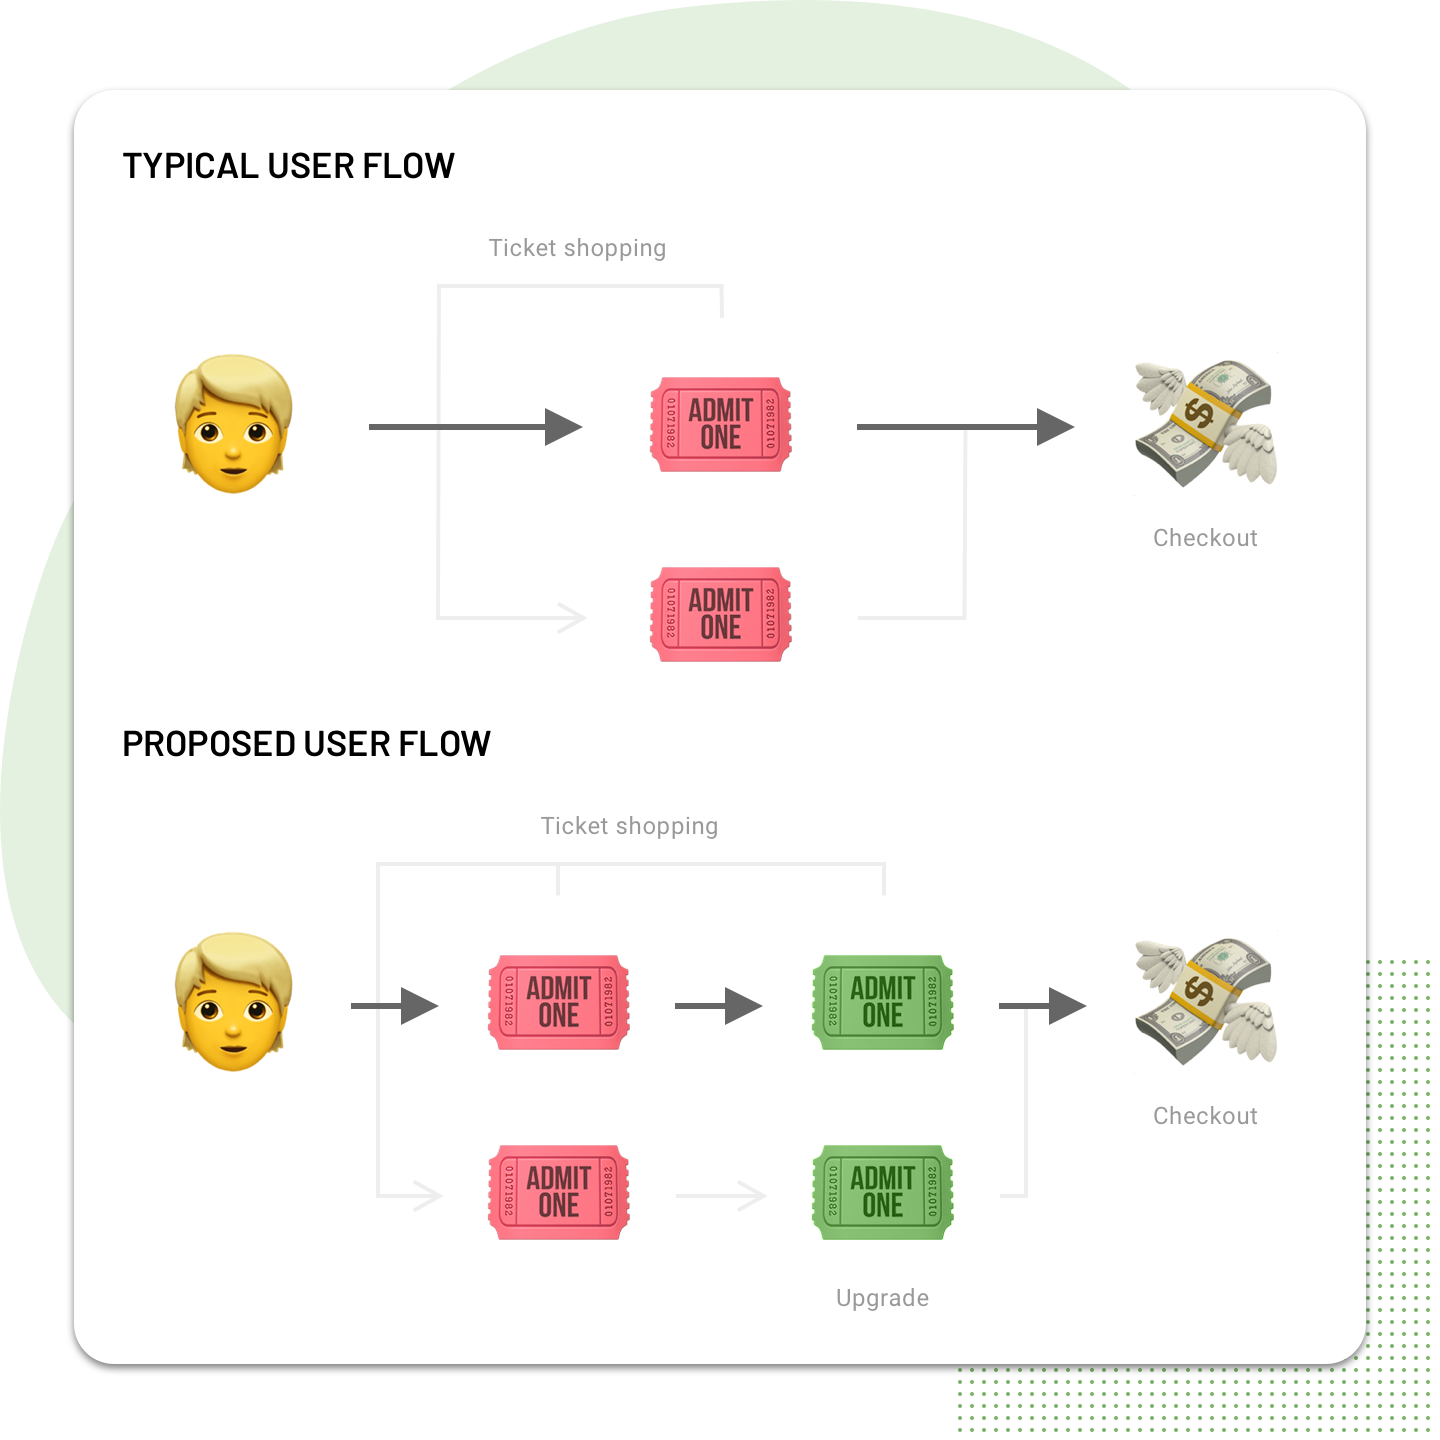 Happy Path: Simplified view of typical and proposed flows